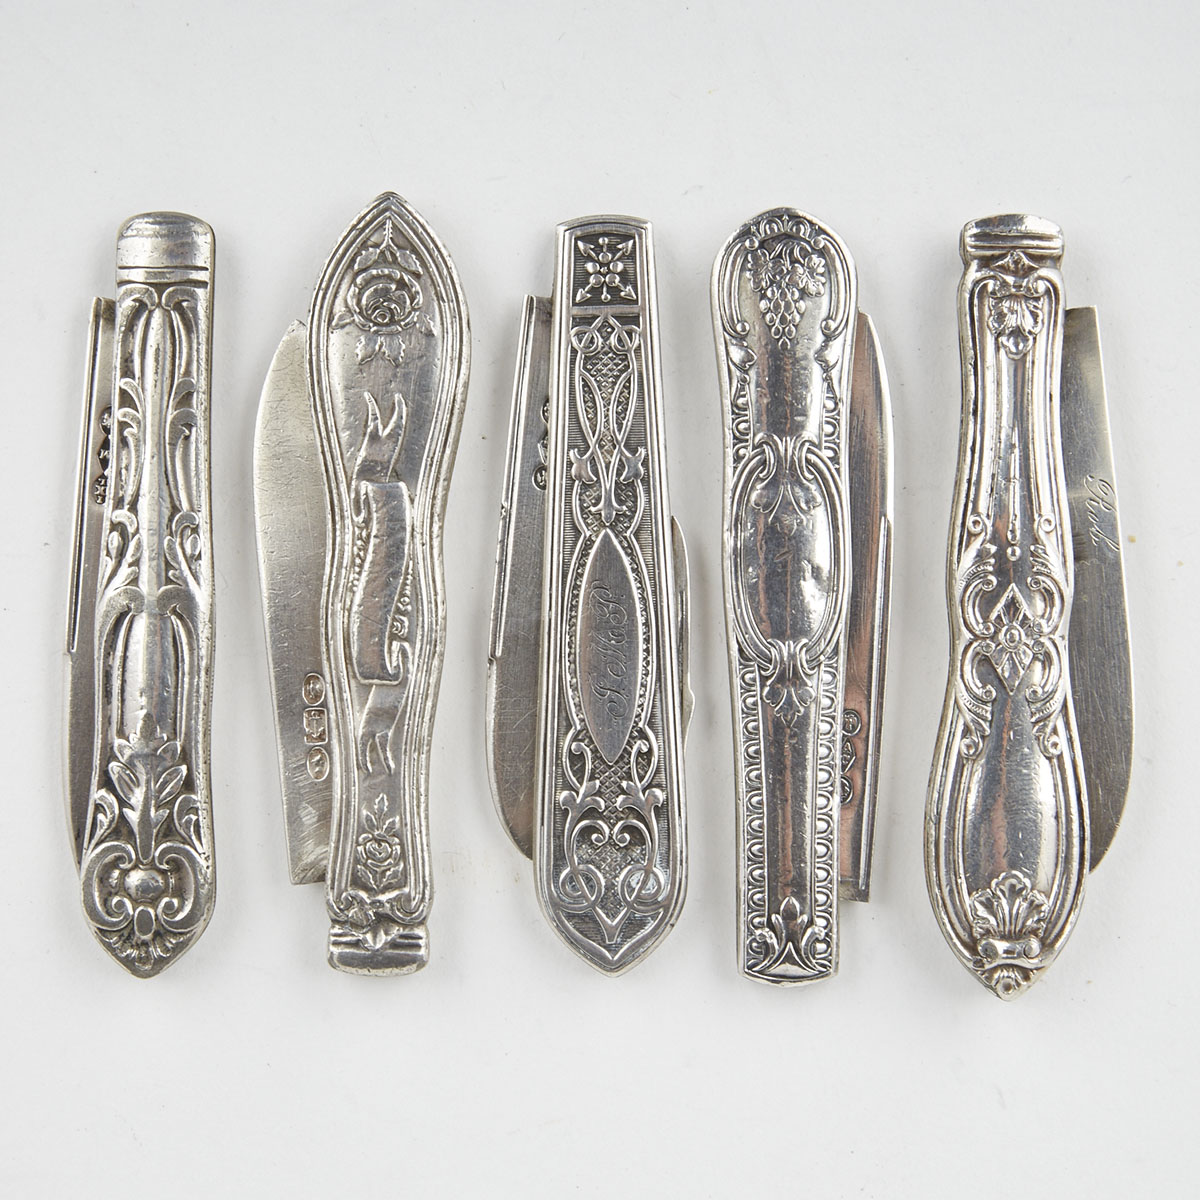 Five American Silver Pocket Knives, late 19th century